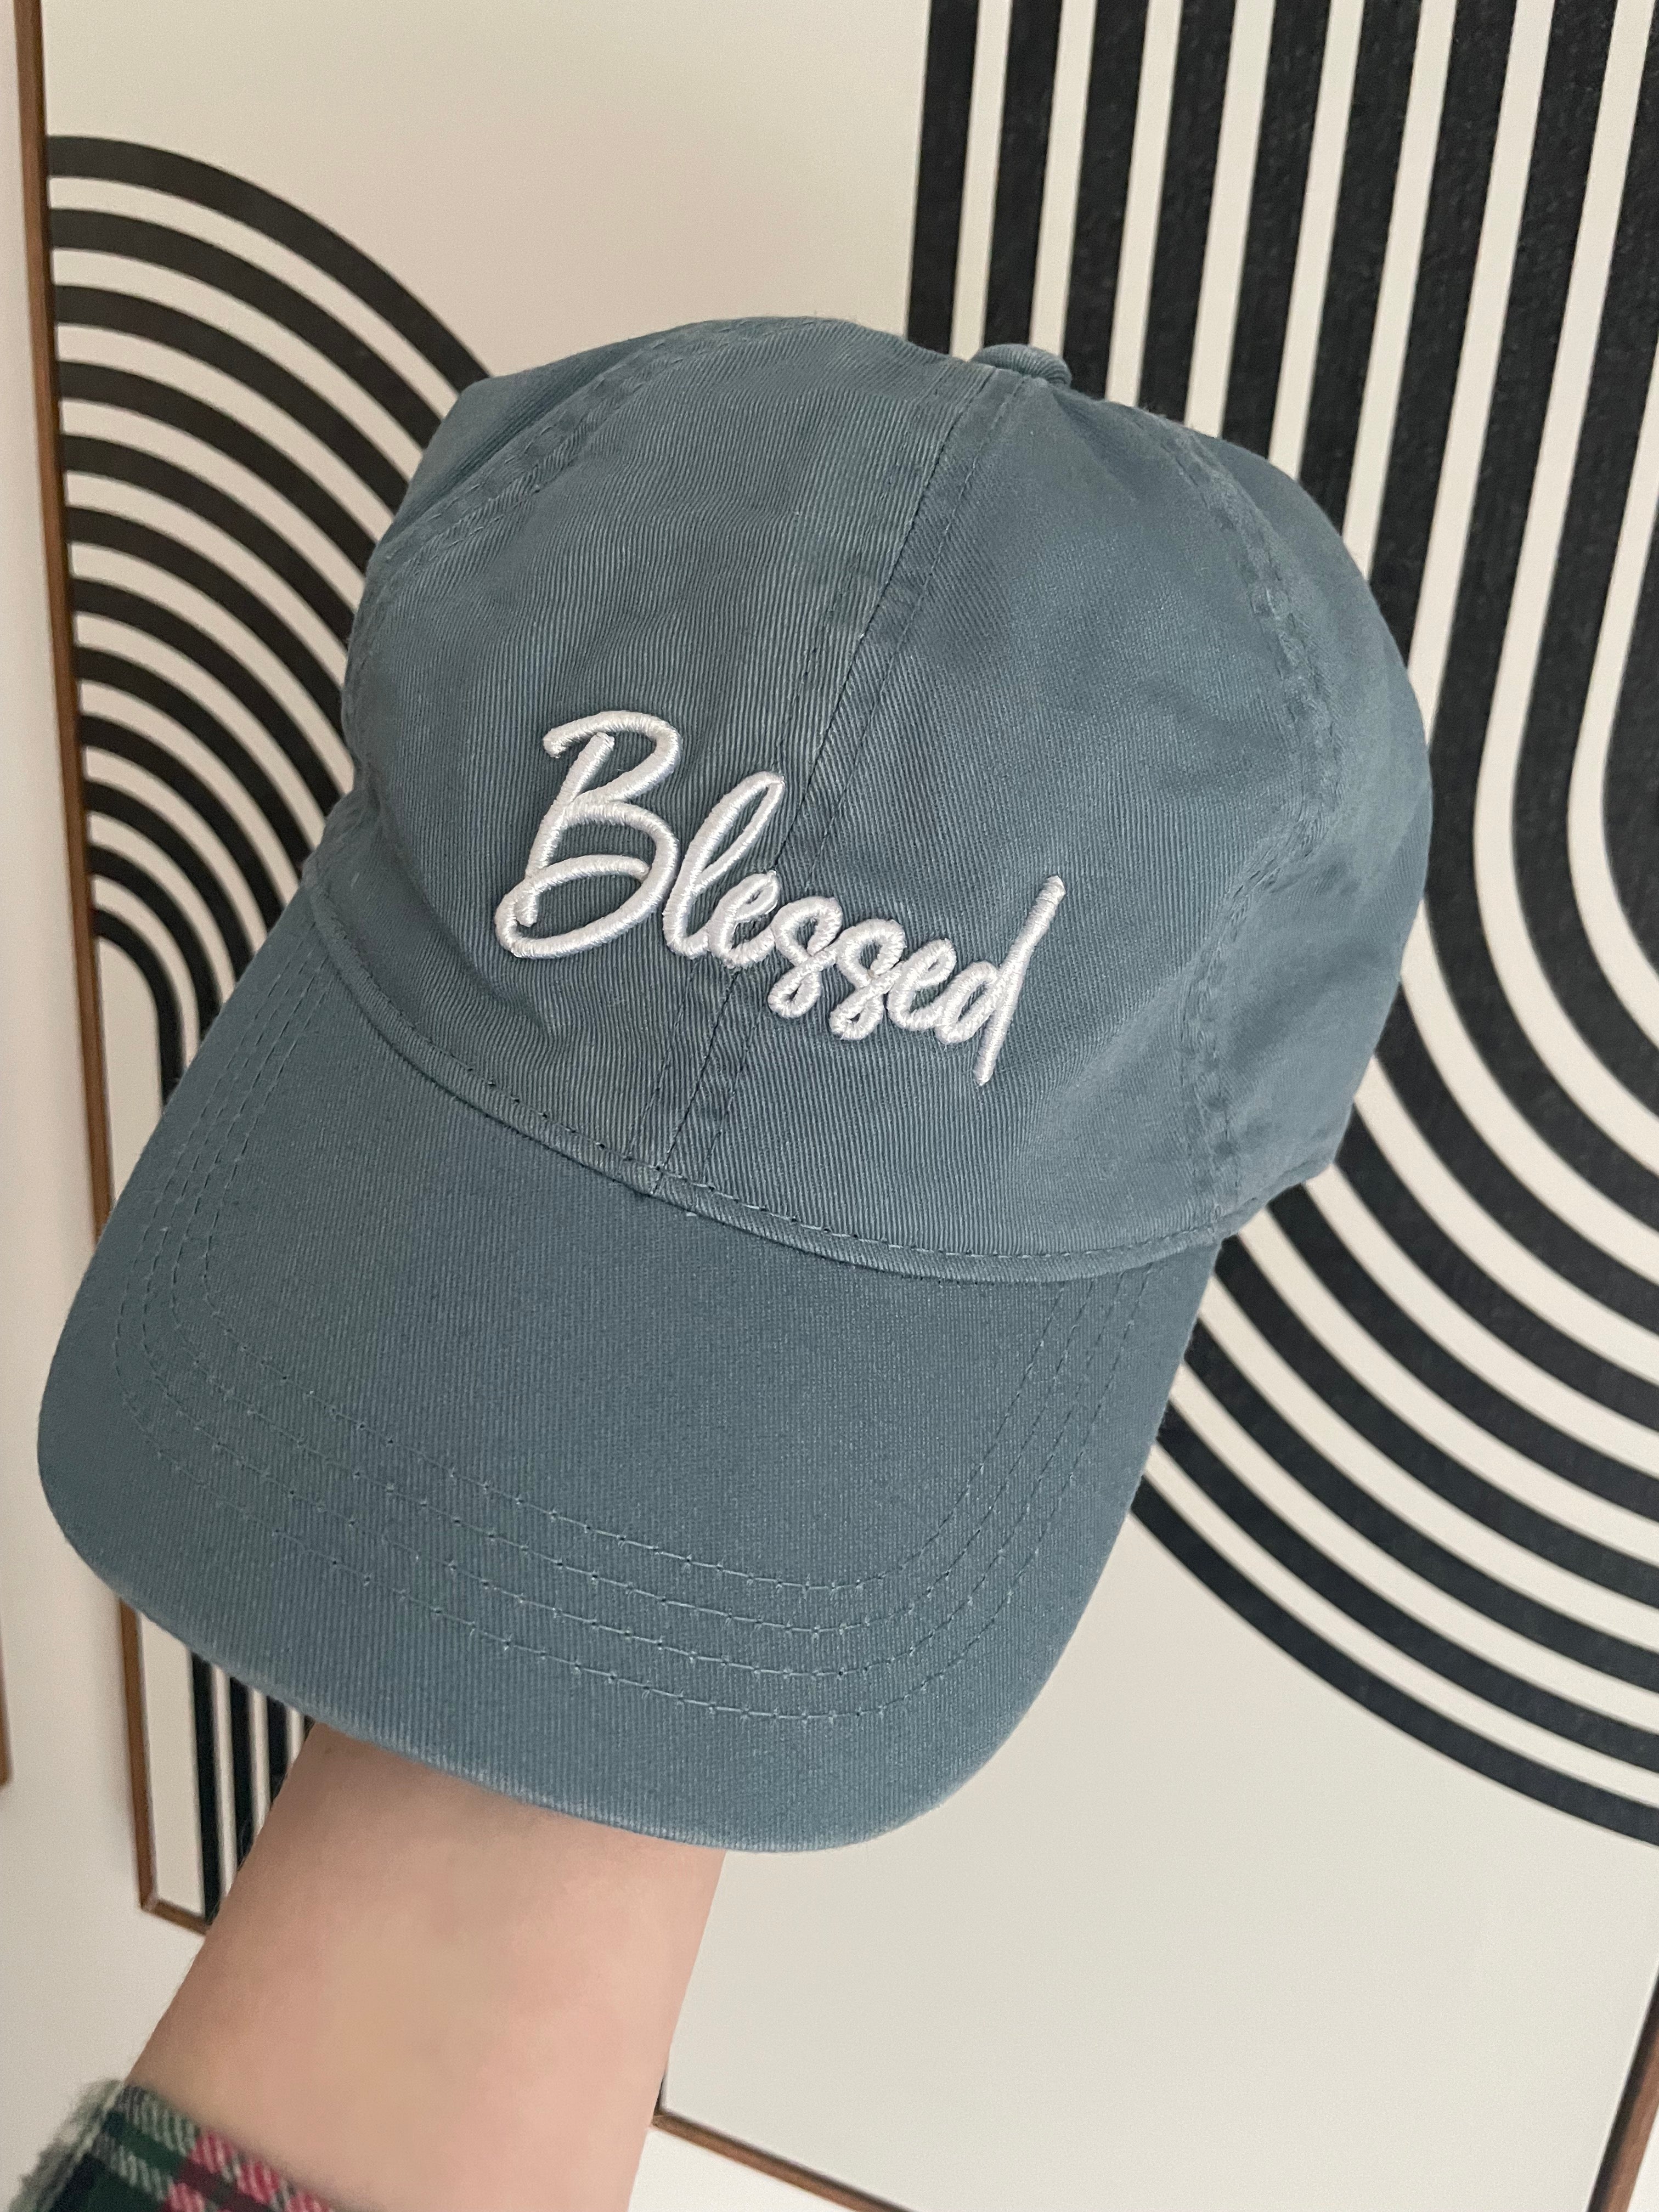 FLASH SALE - The Reese - Blessed Baseball Hat